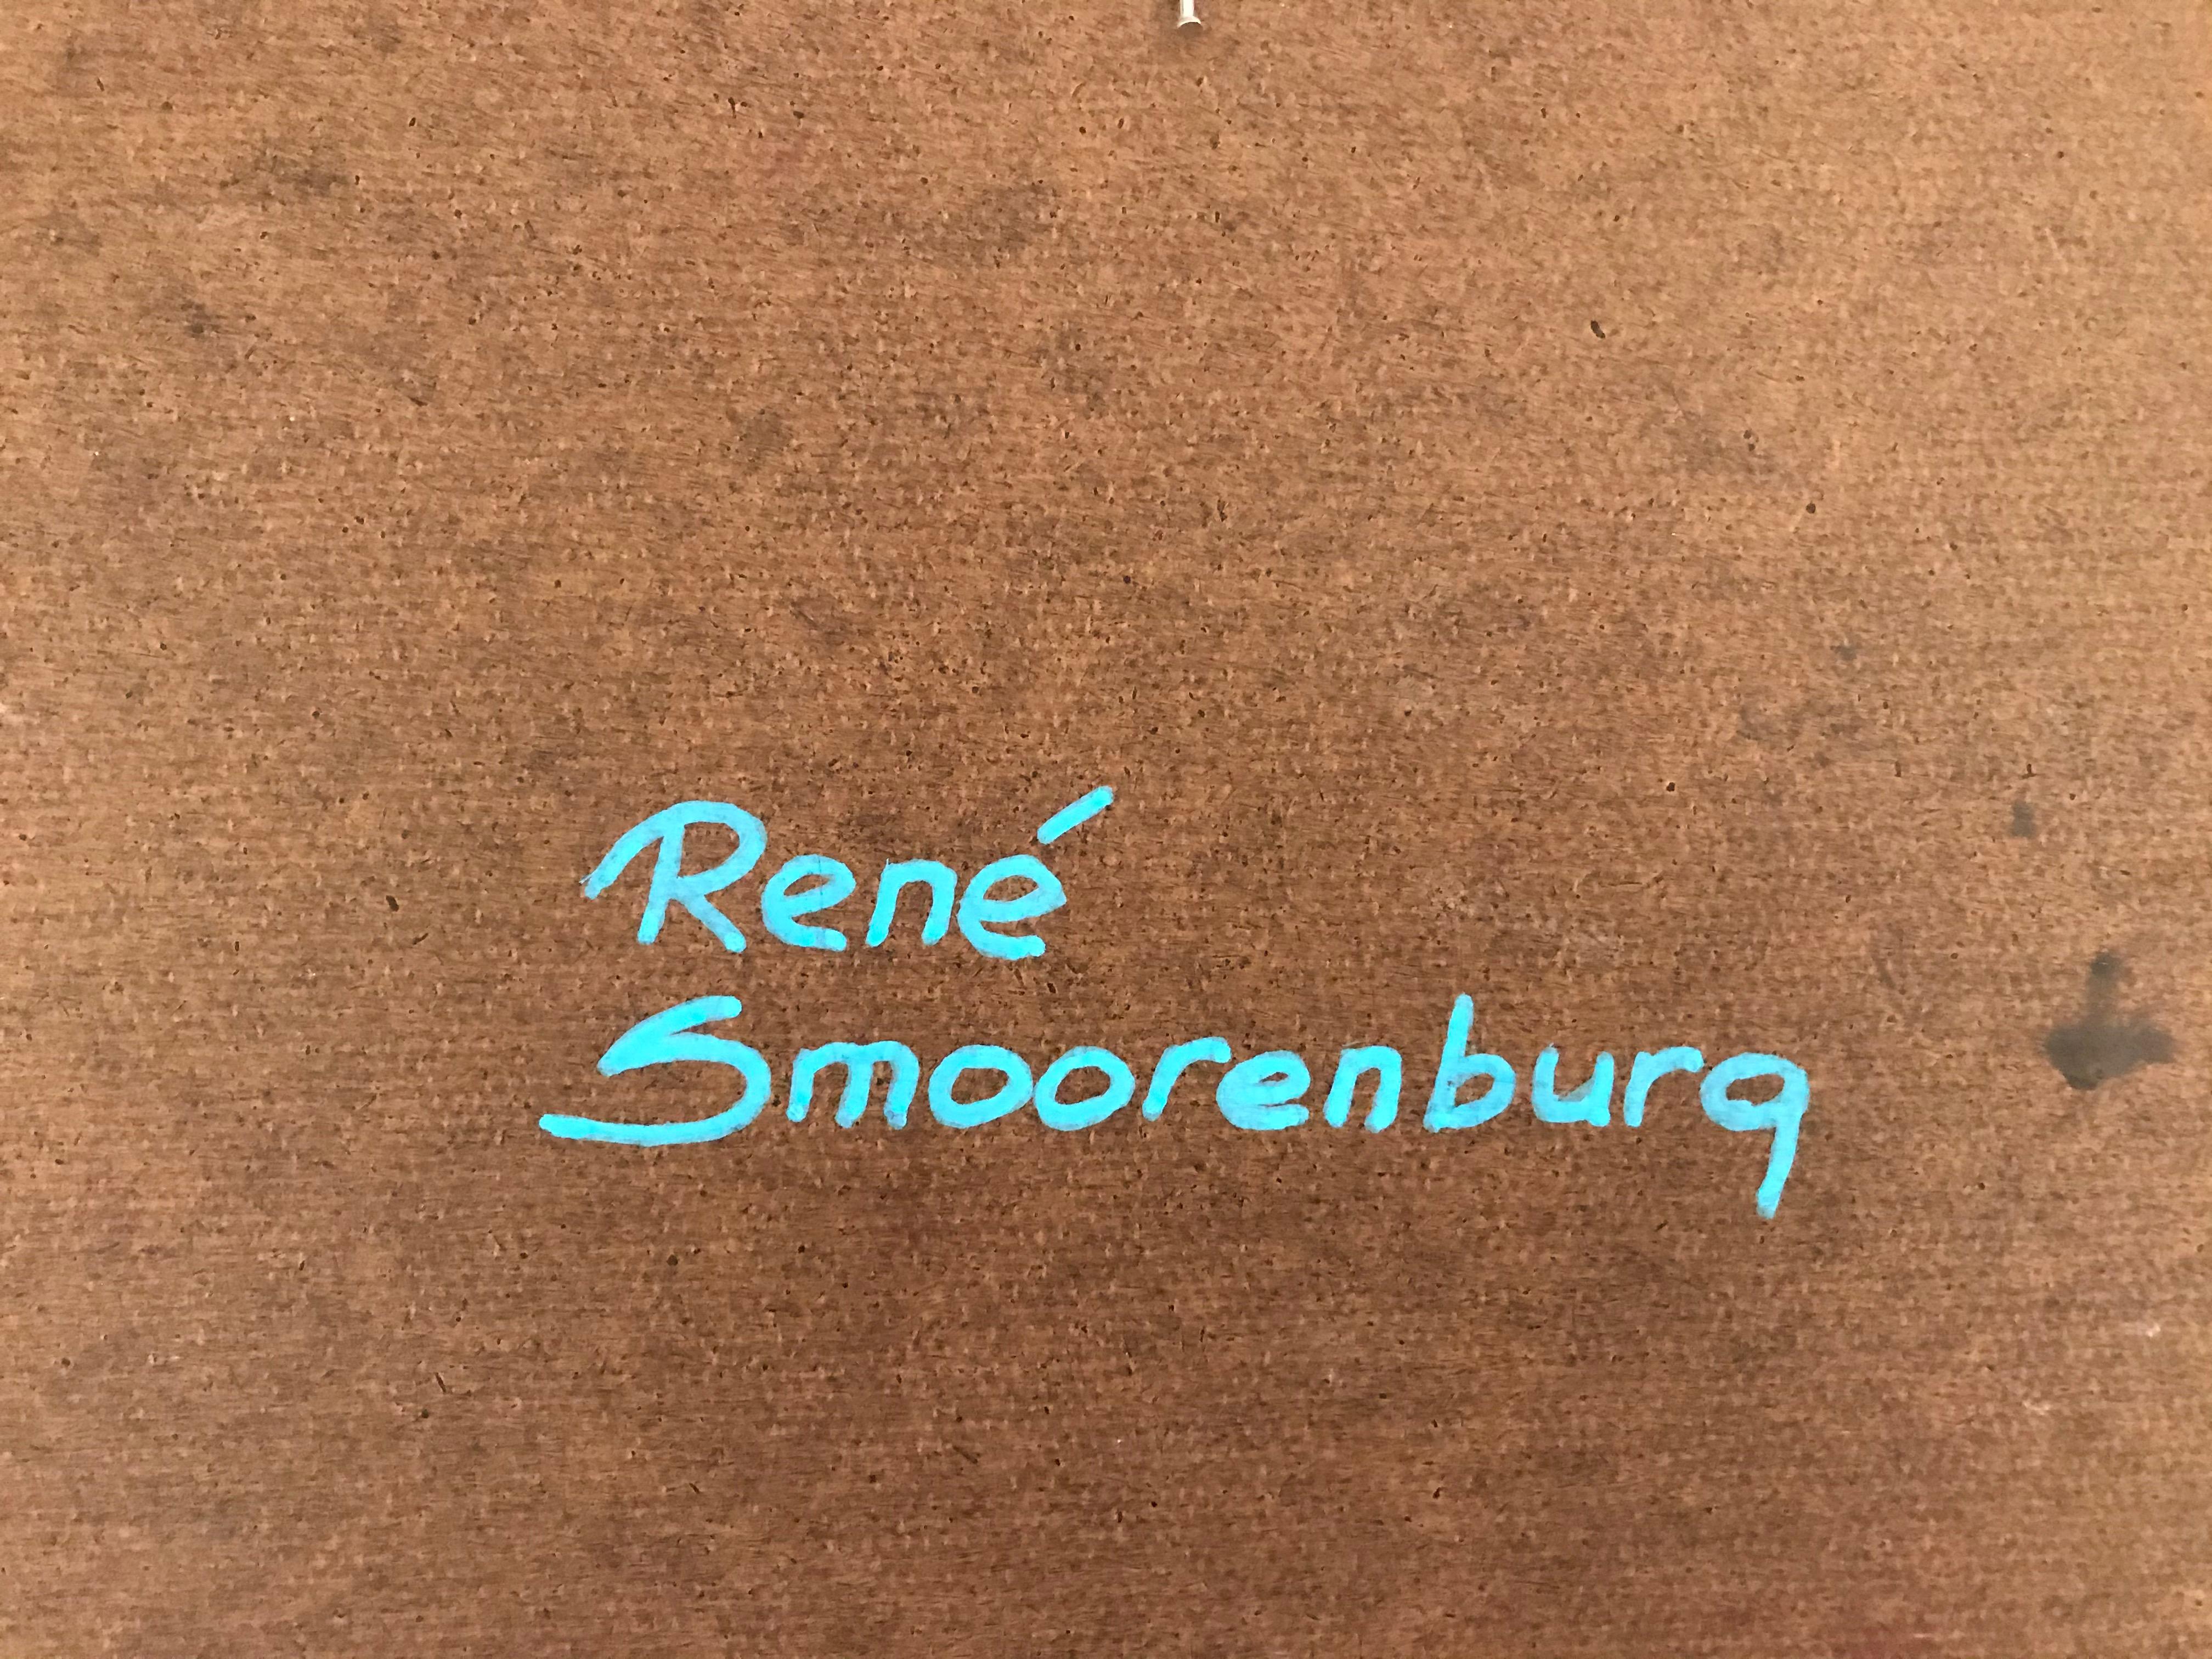 During his successful career as a goldsmith the desire to paint grew on Dutch artist René Smoorenburg (1954). The attention to detail, which was of great importance in his work as a goldsmith, proved of great value in painting his realistic still